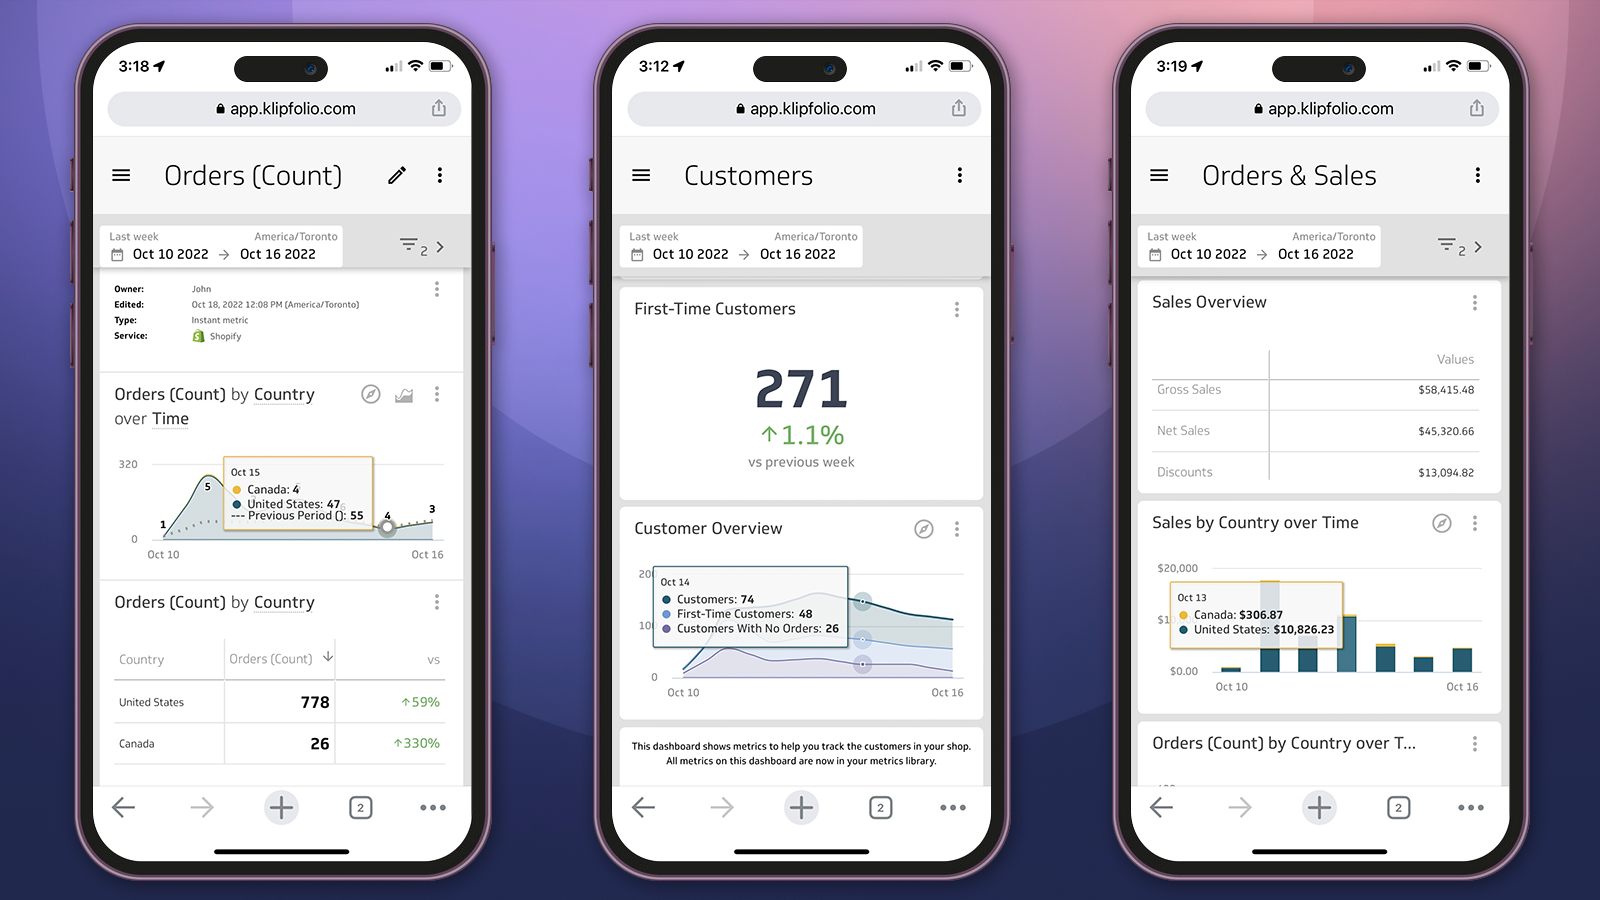 View your Shopify metrics on iOS or Android devices